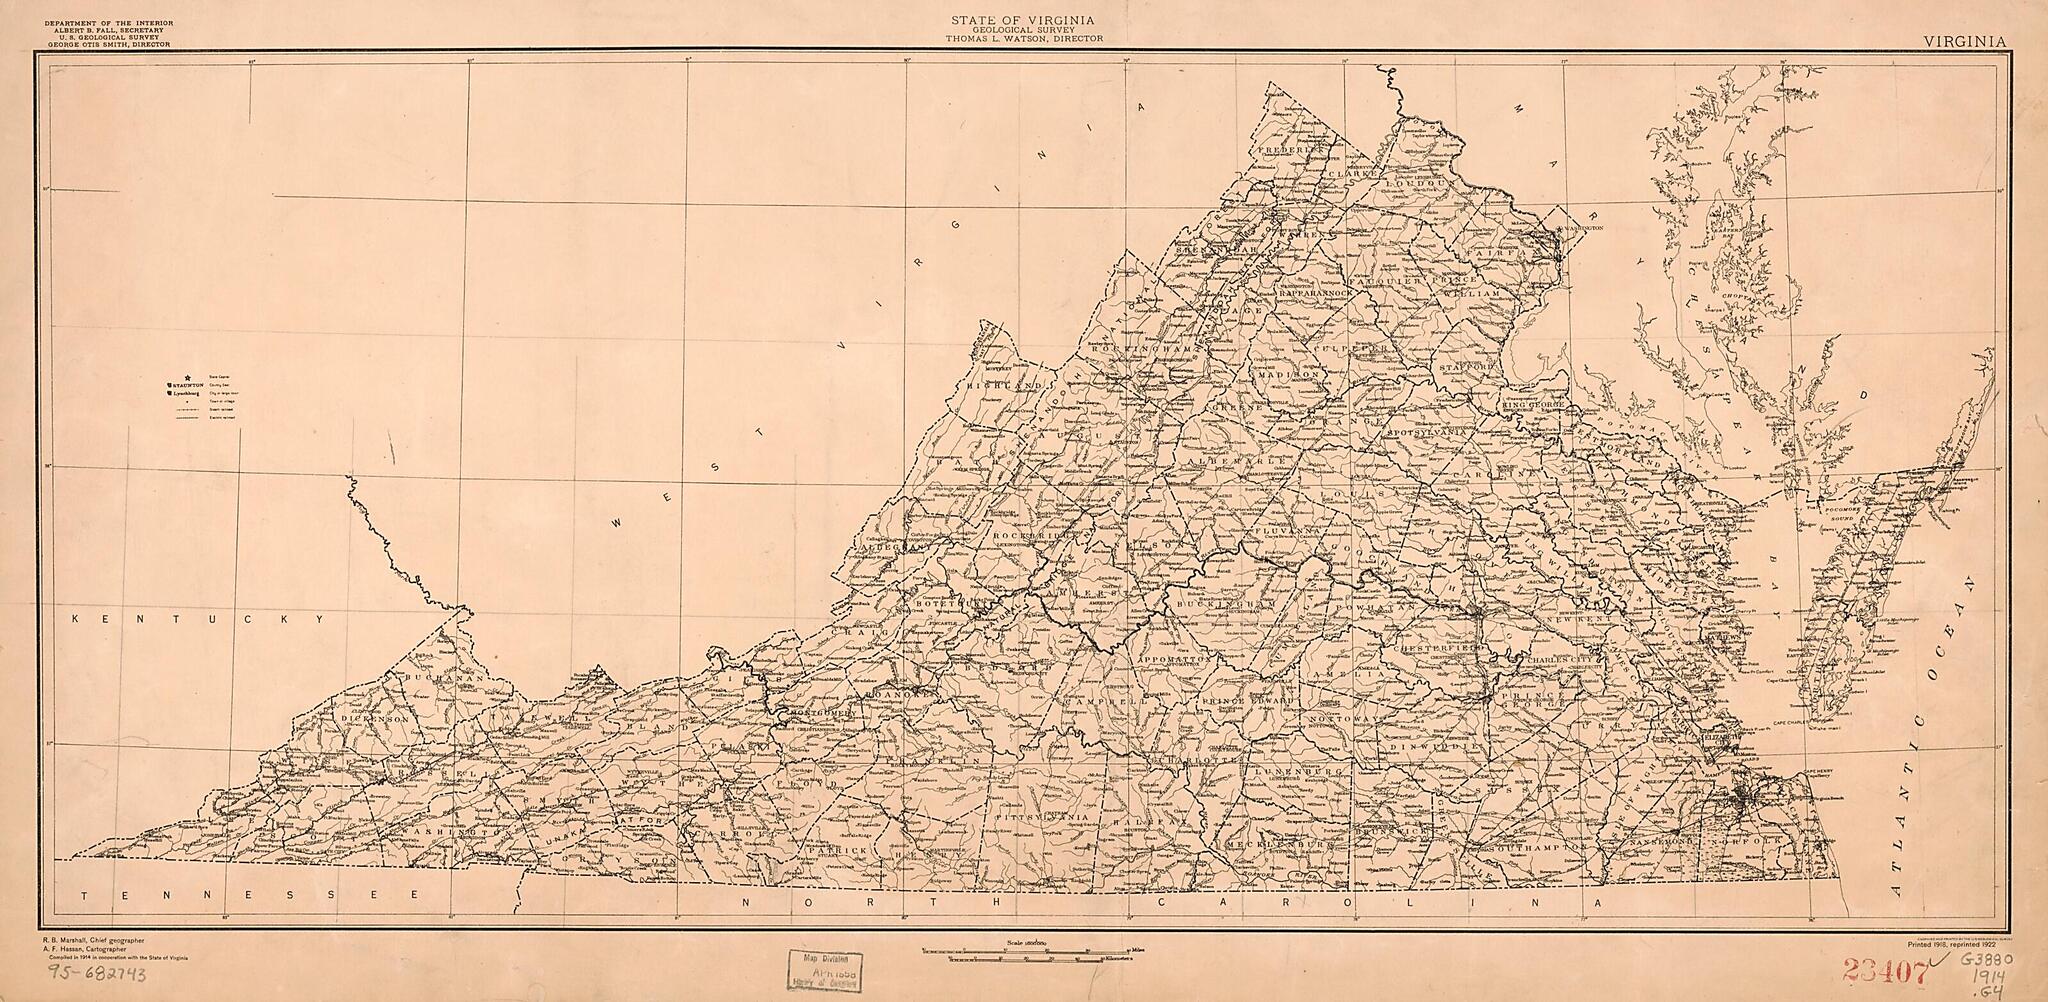 This old map of Virginia from 1914 was created by  Geological Survey (U.S.) in 1914